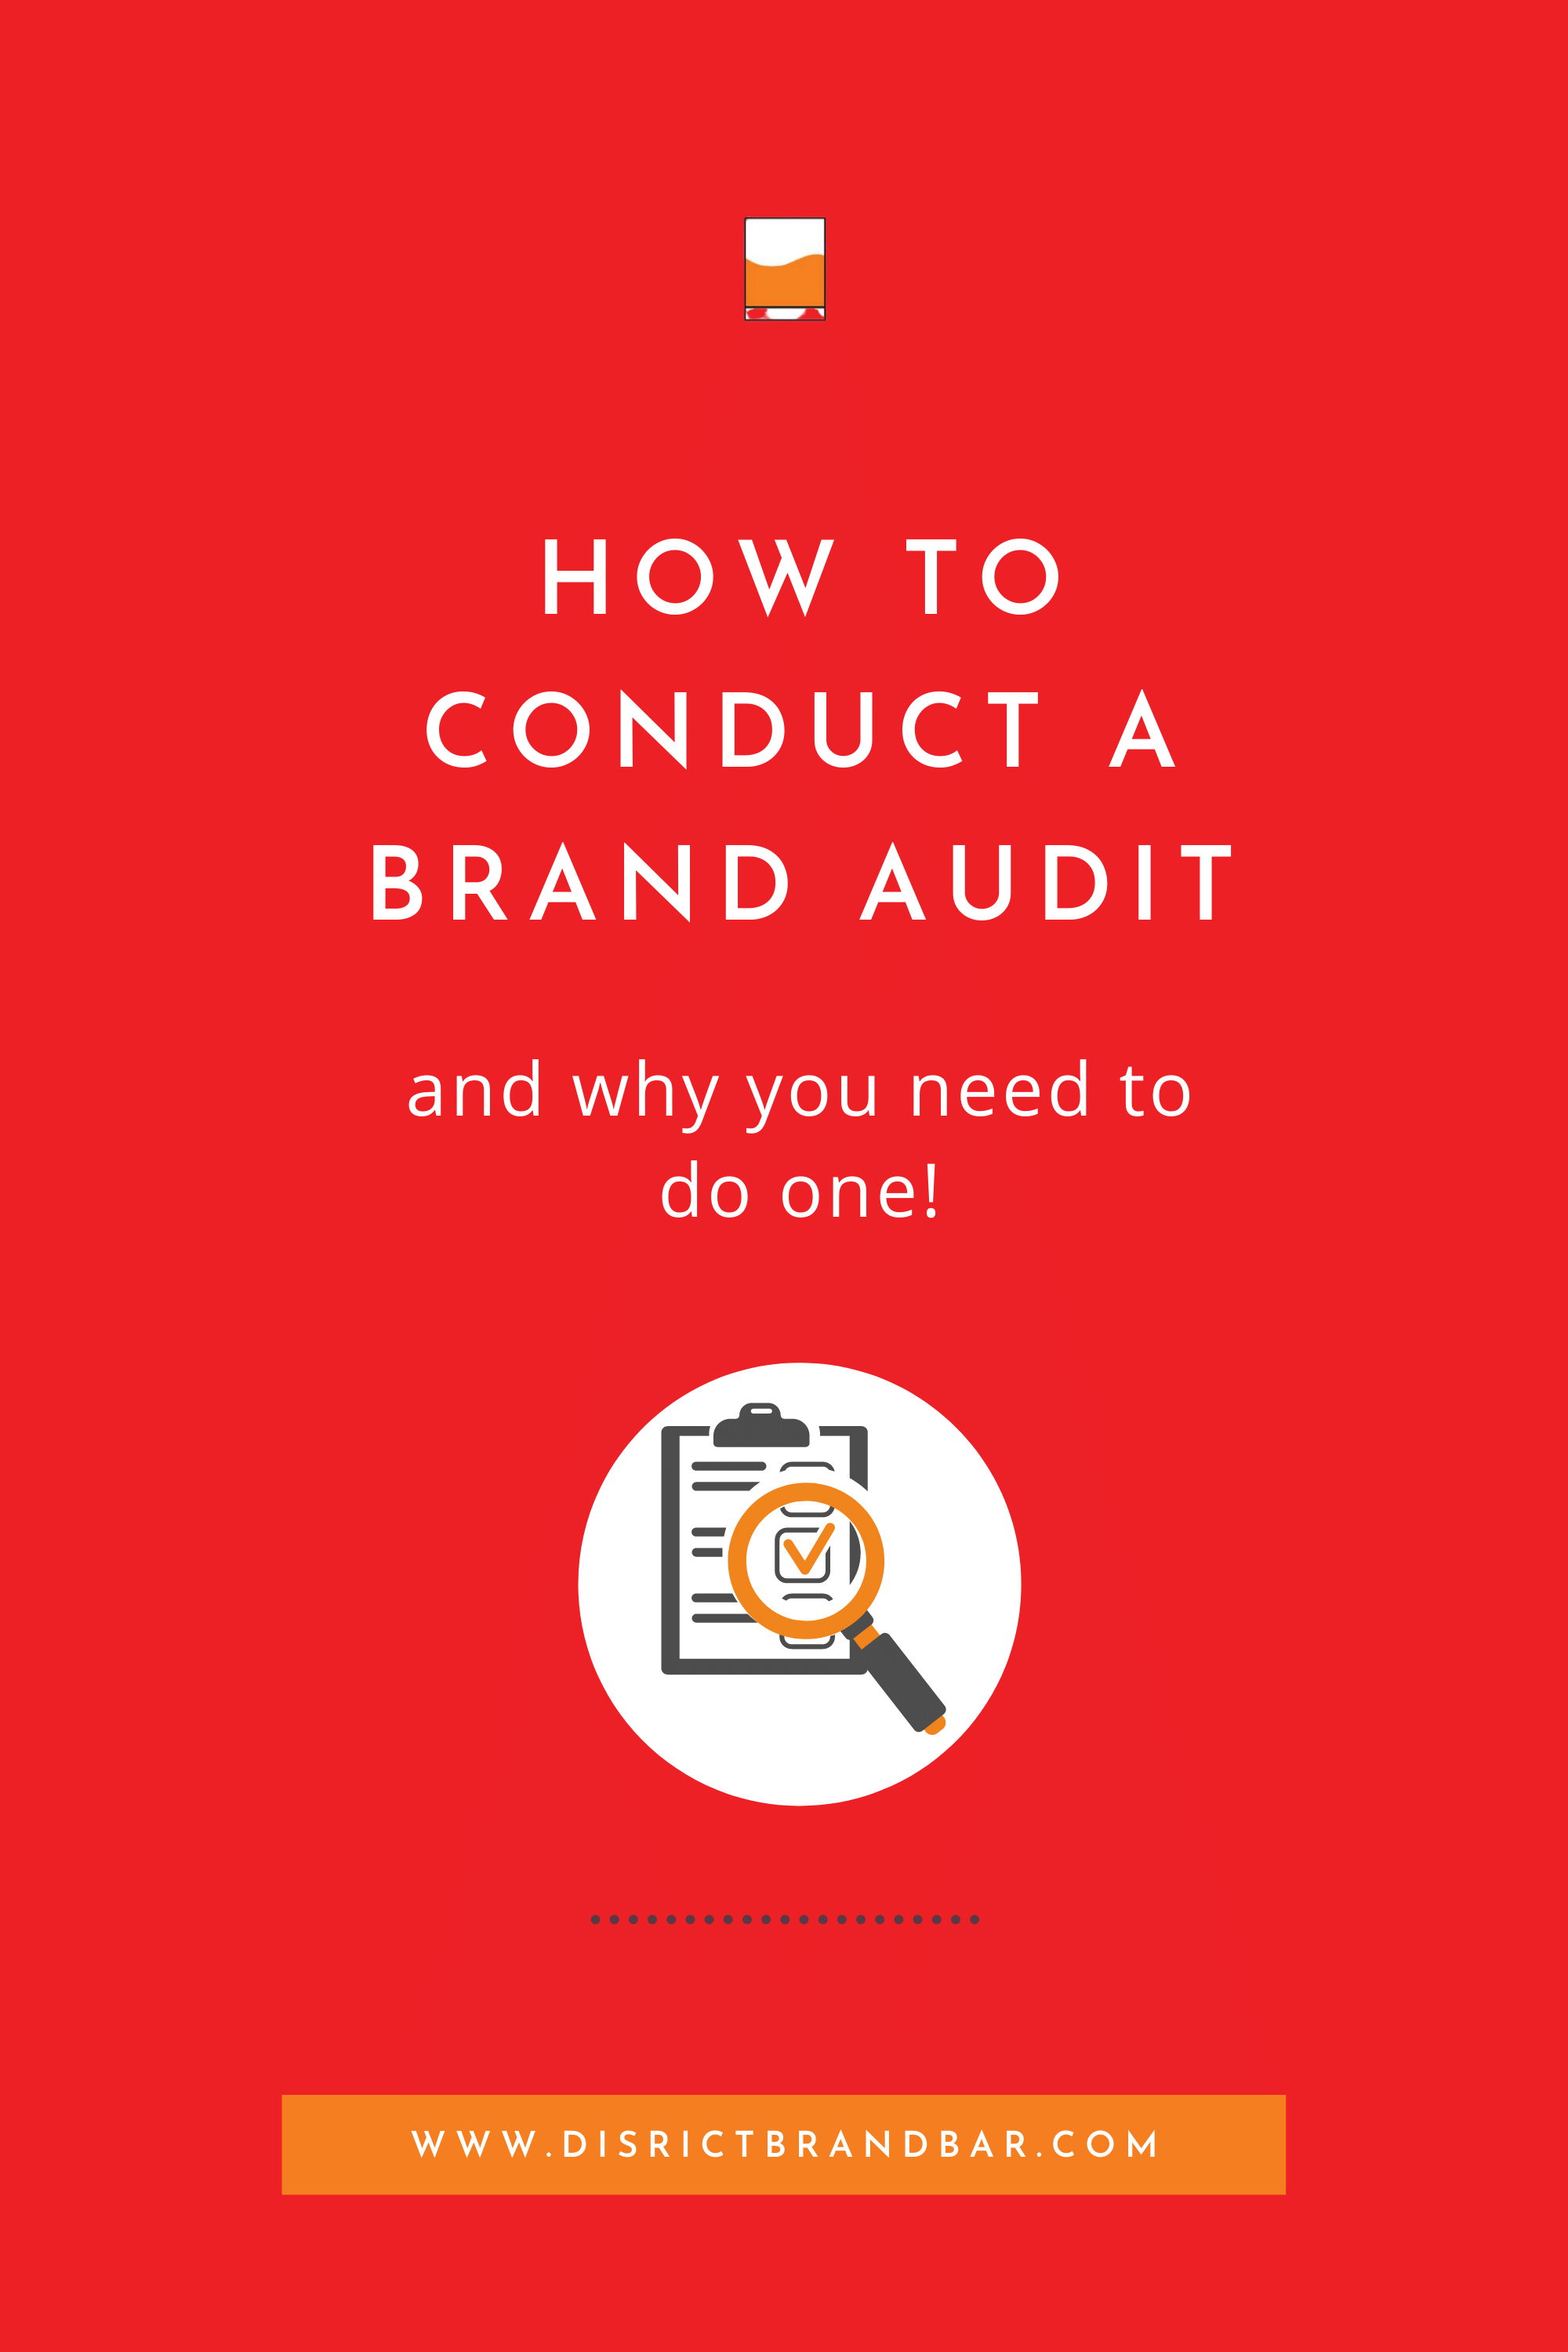 How to conduct a brand audit